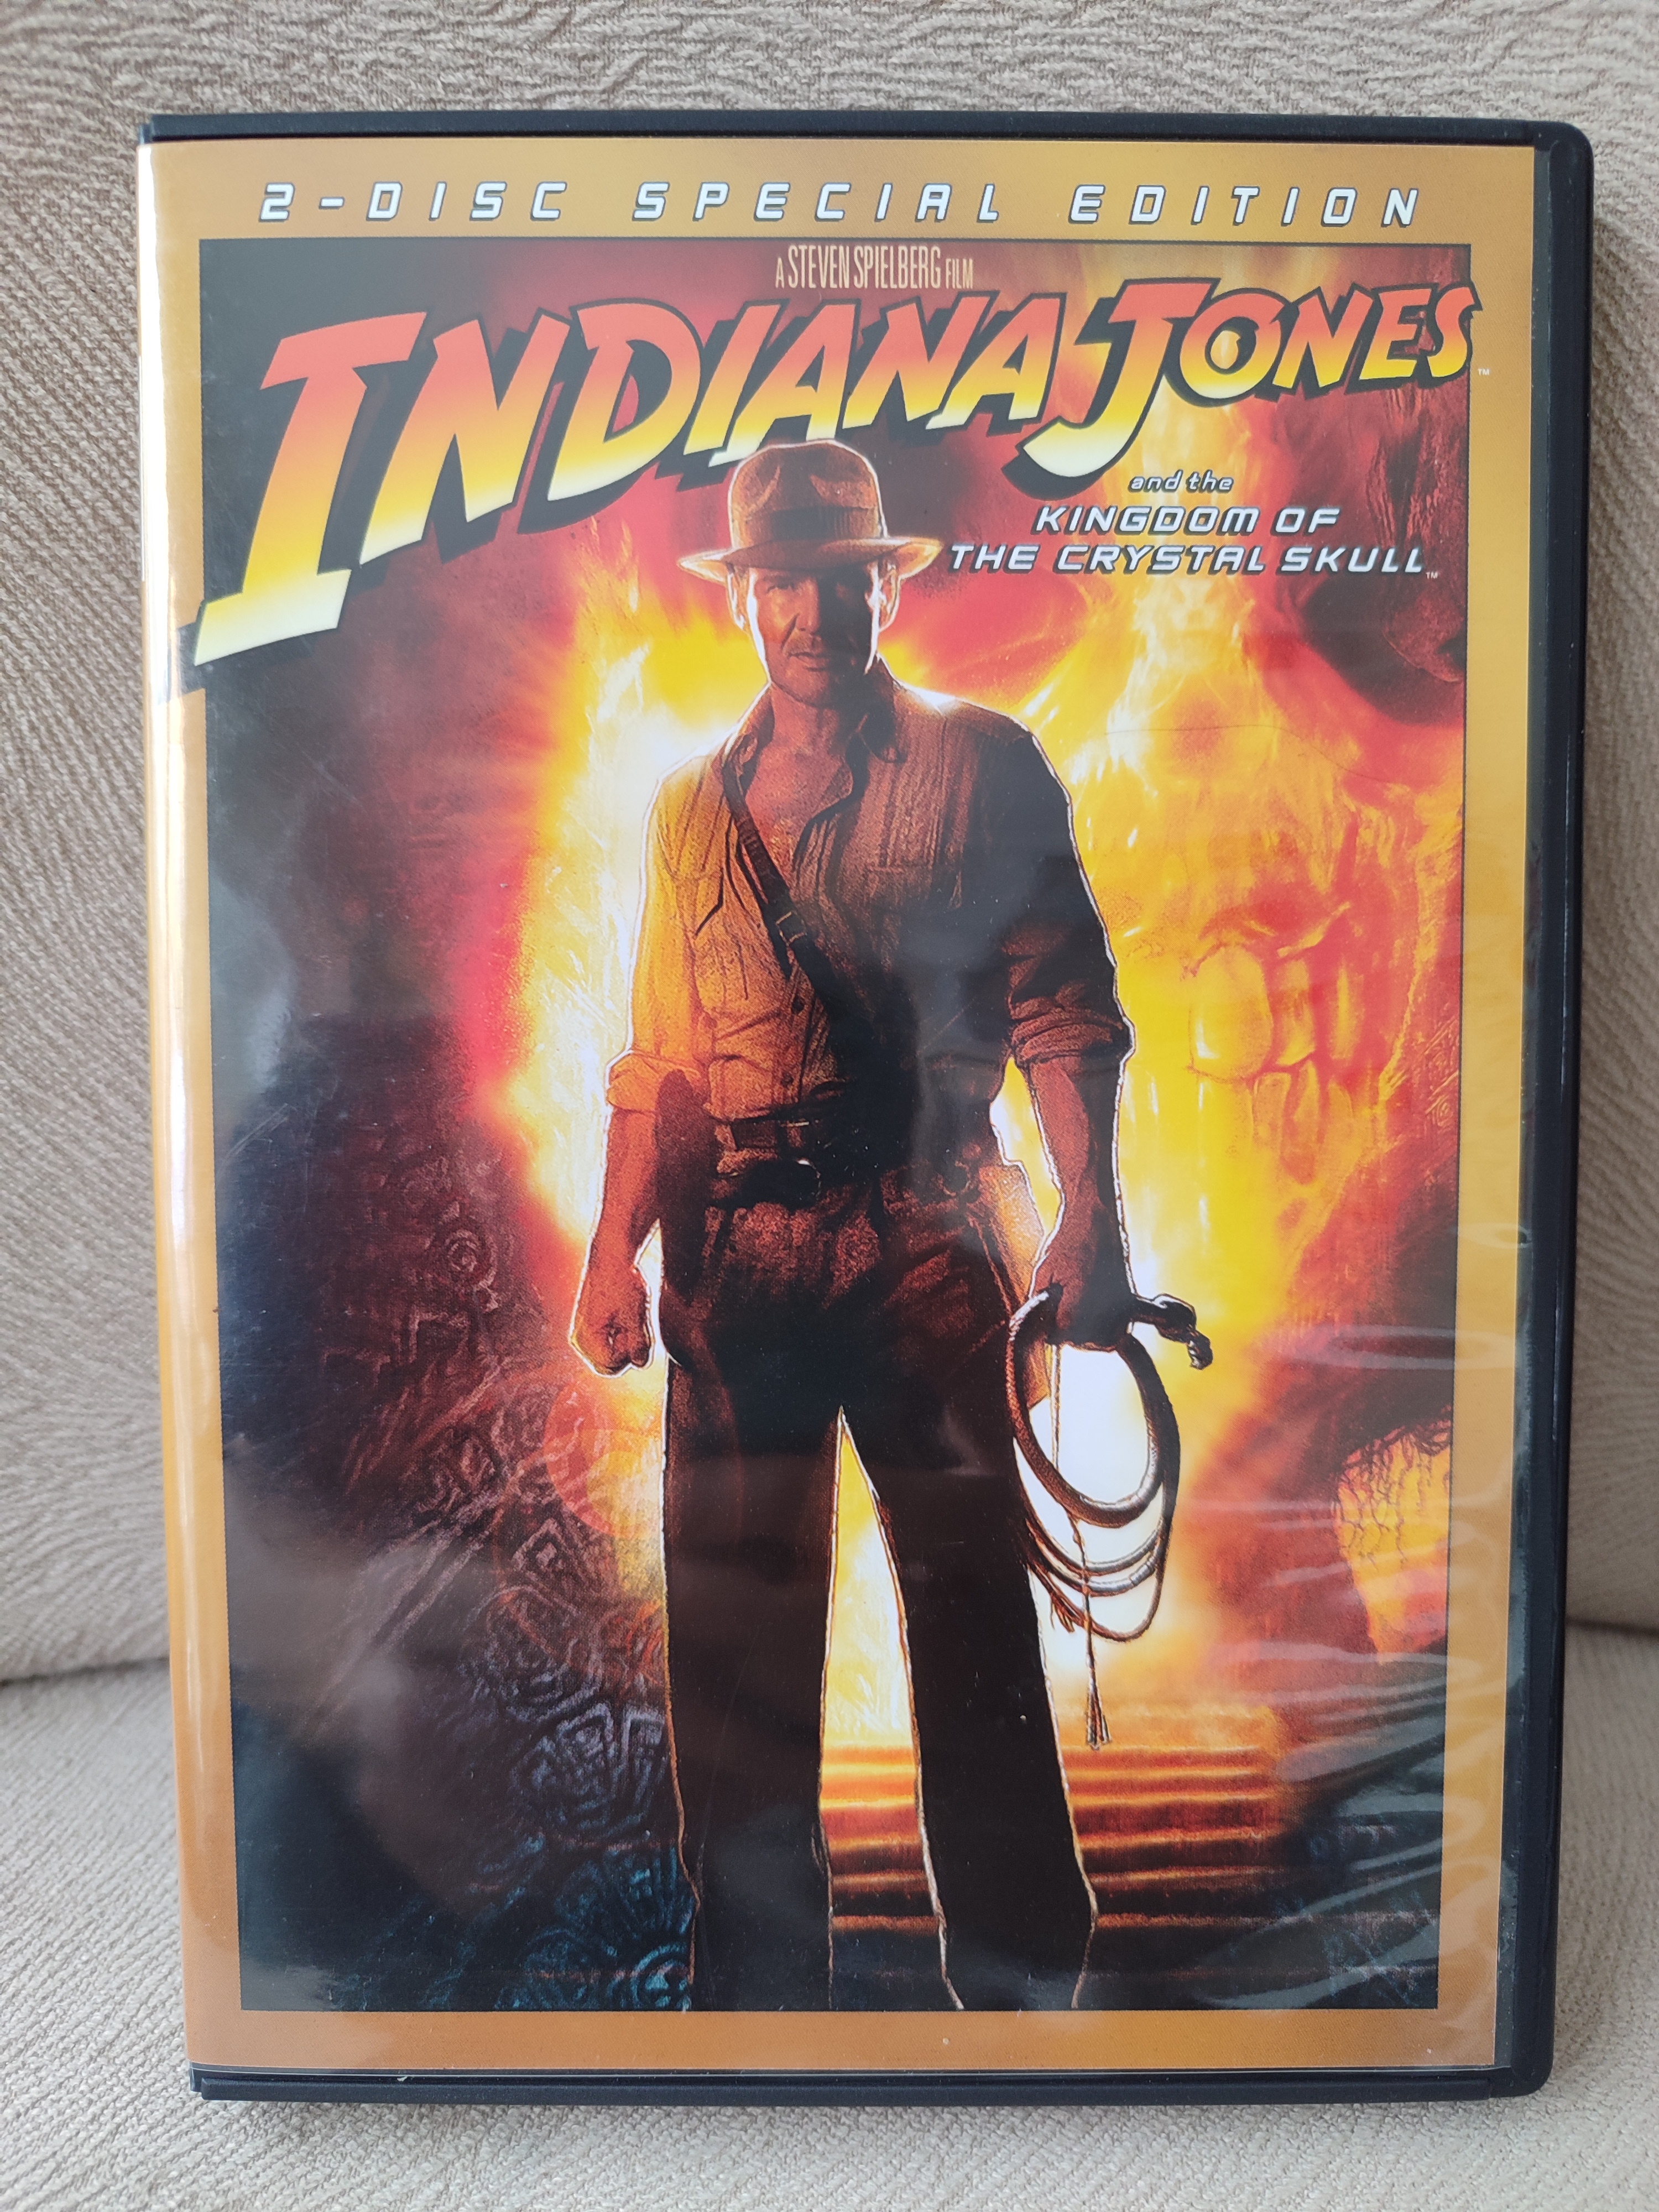 INDIANA JONES and The Kingdom of The Crystal Skull - 2 Disc Special Edition DVD 2. EL